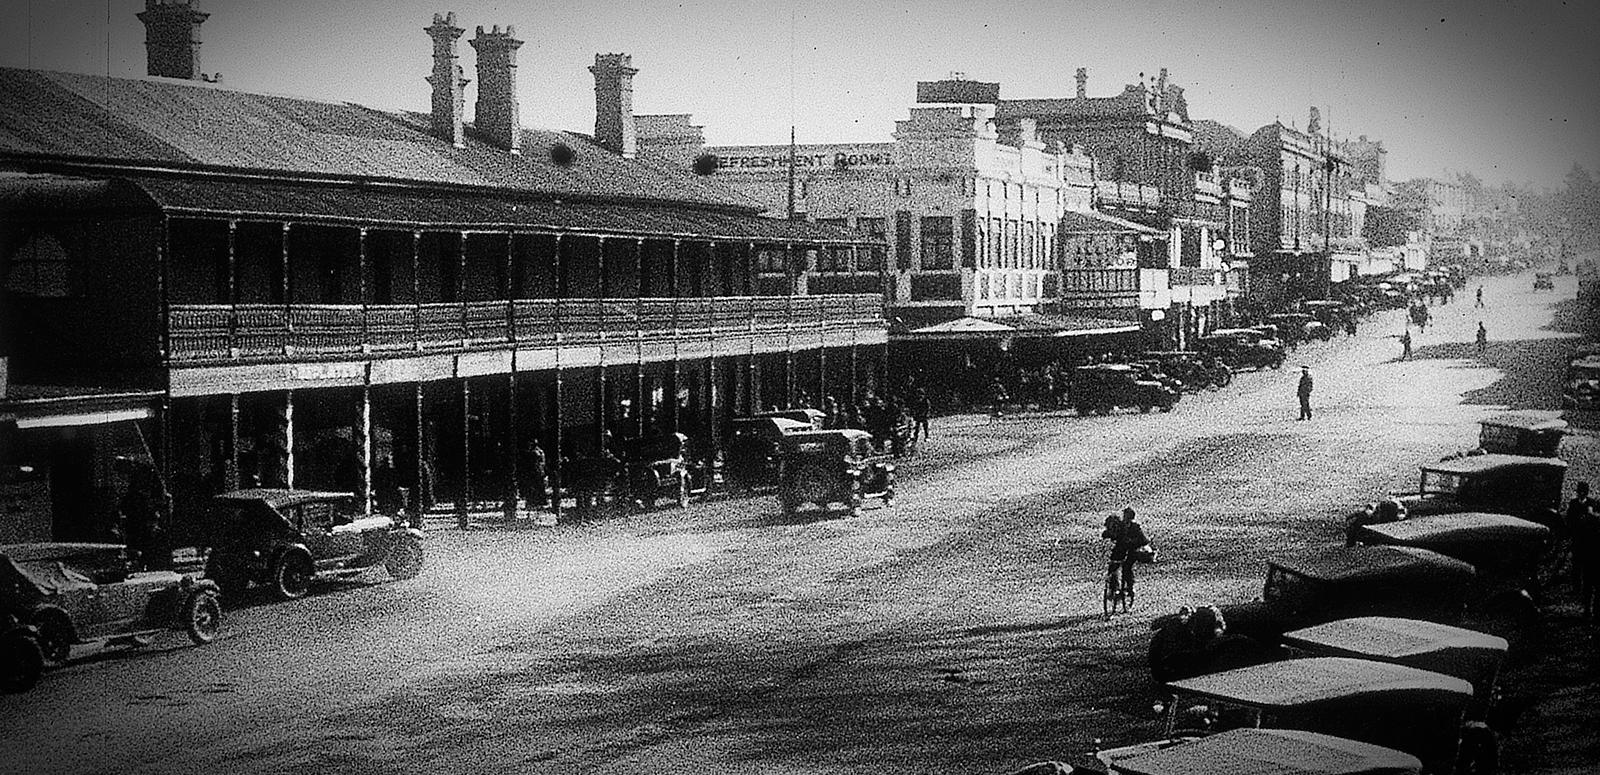 Street view of the town of Orange, NSW in 1927